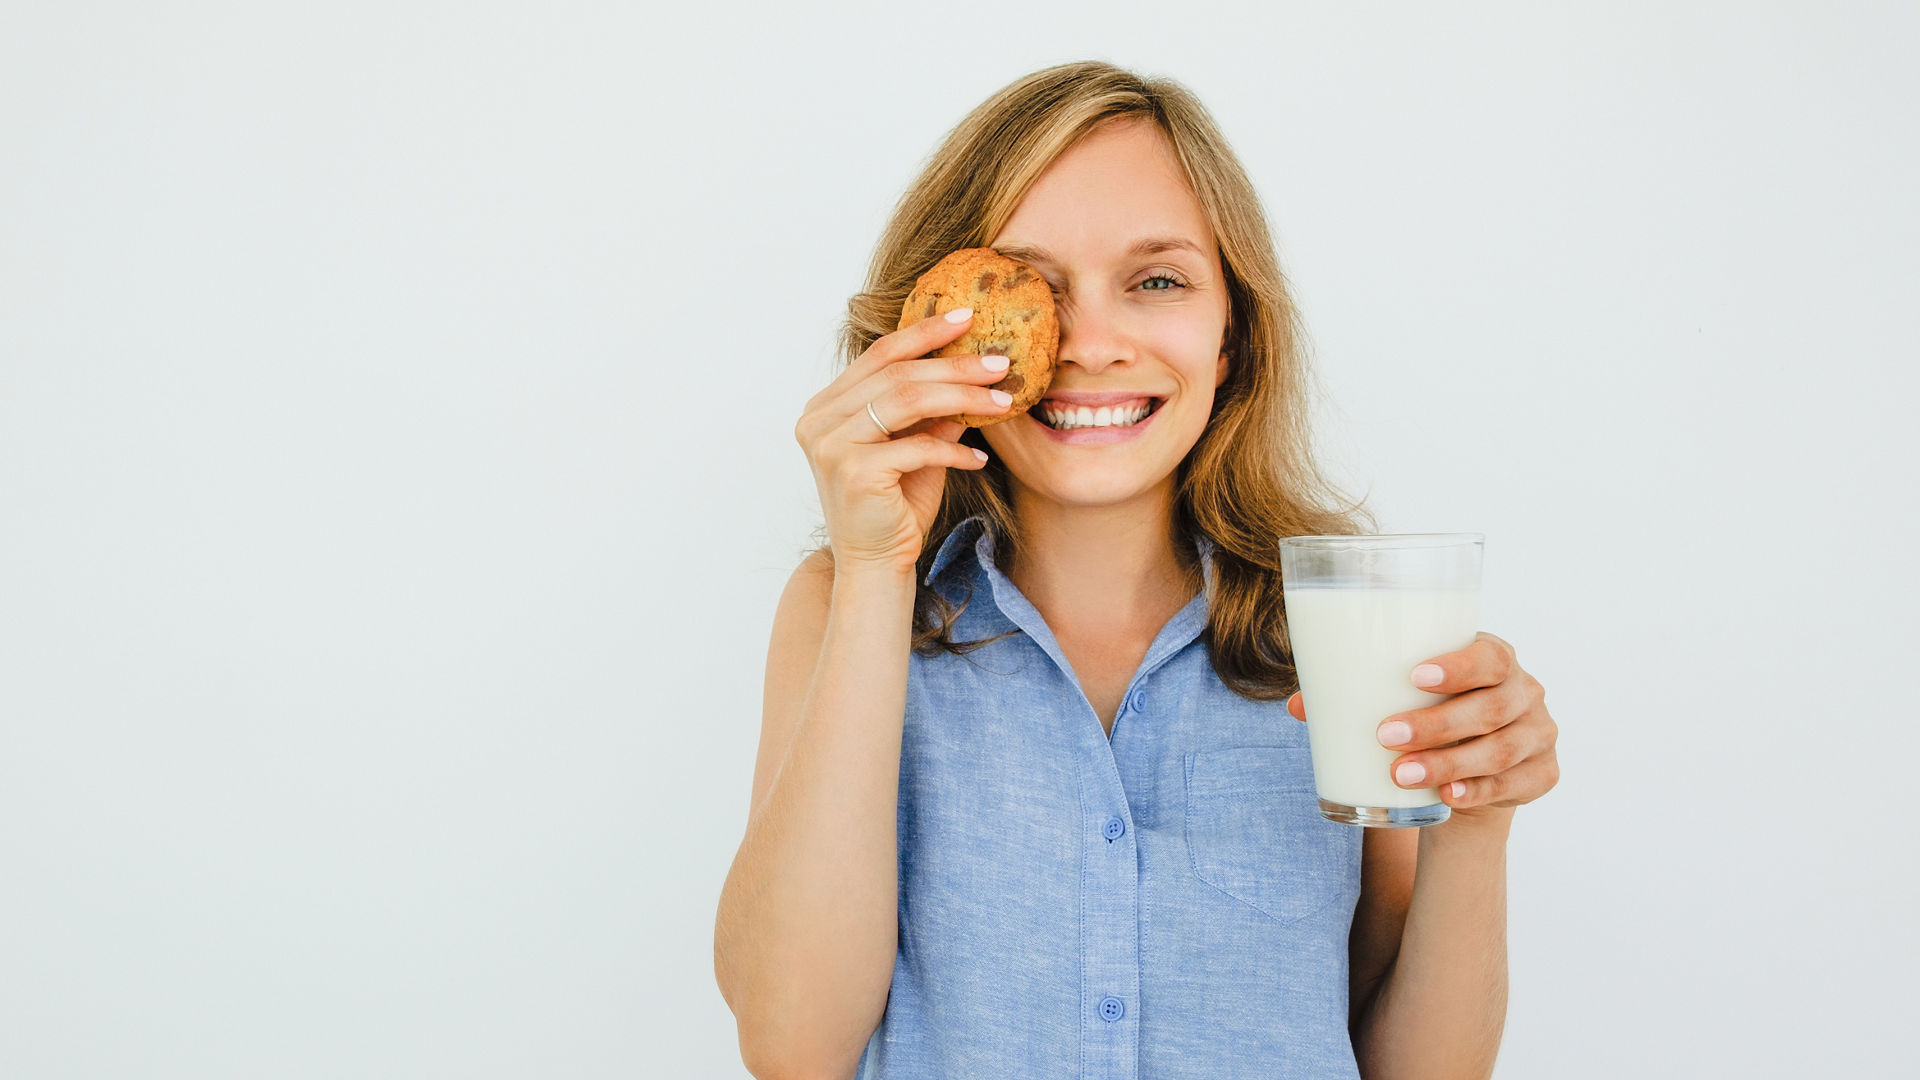 Woman Holding Glass of Milk and Cookie; Shutterstock ID 689900761